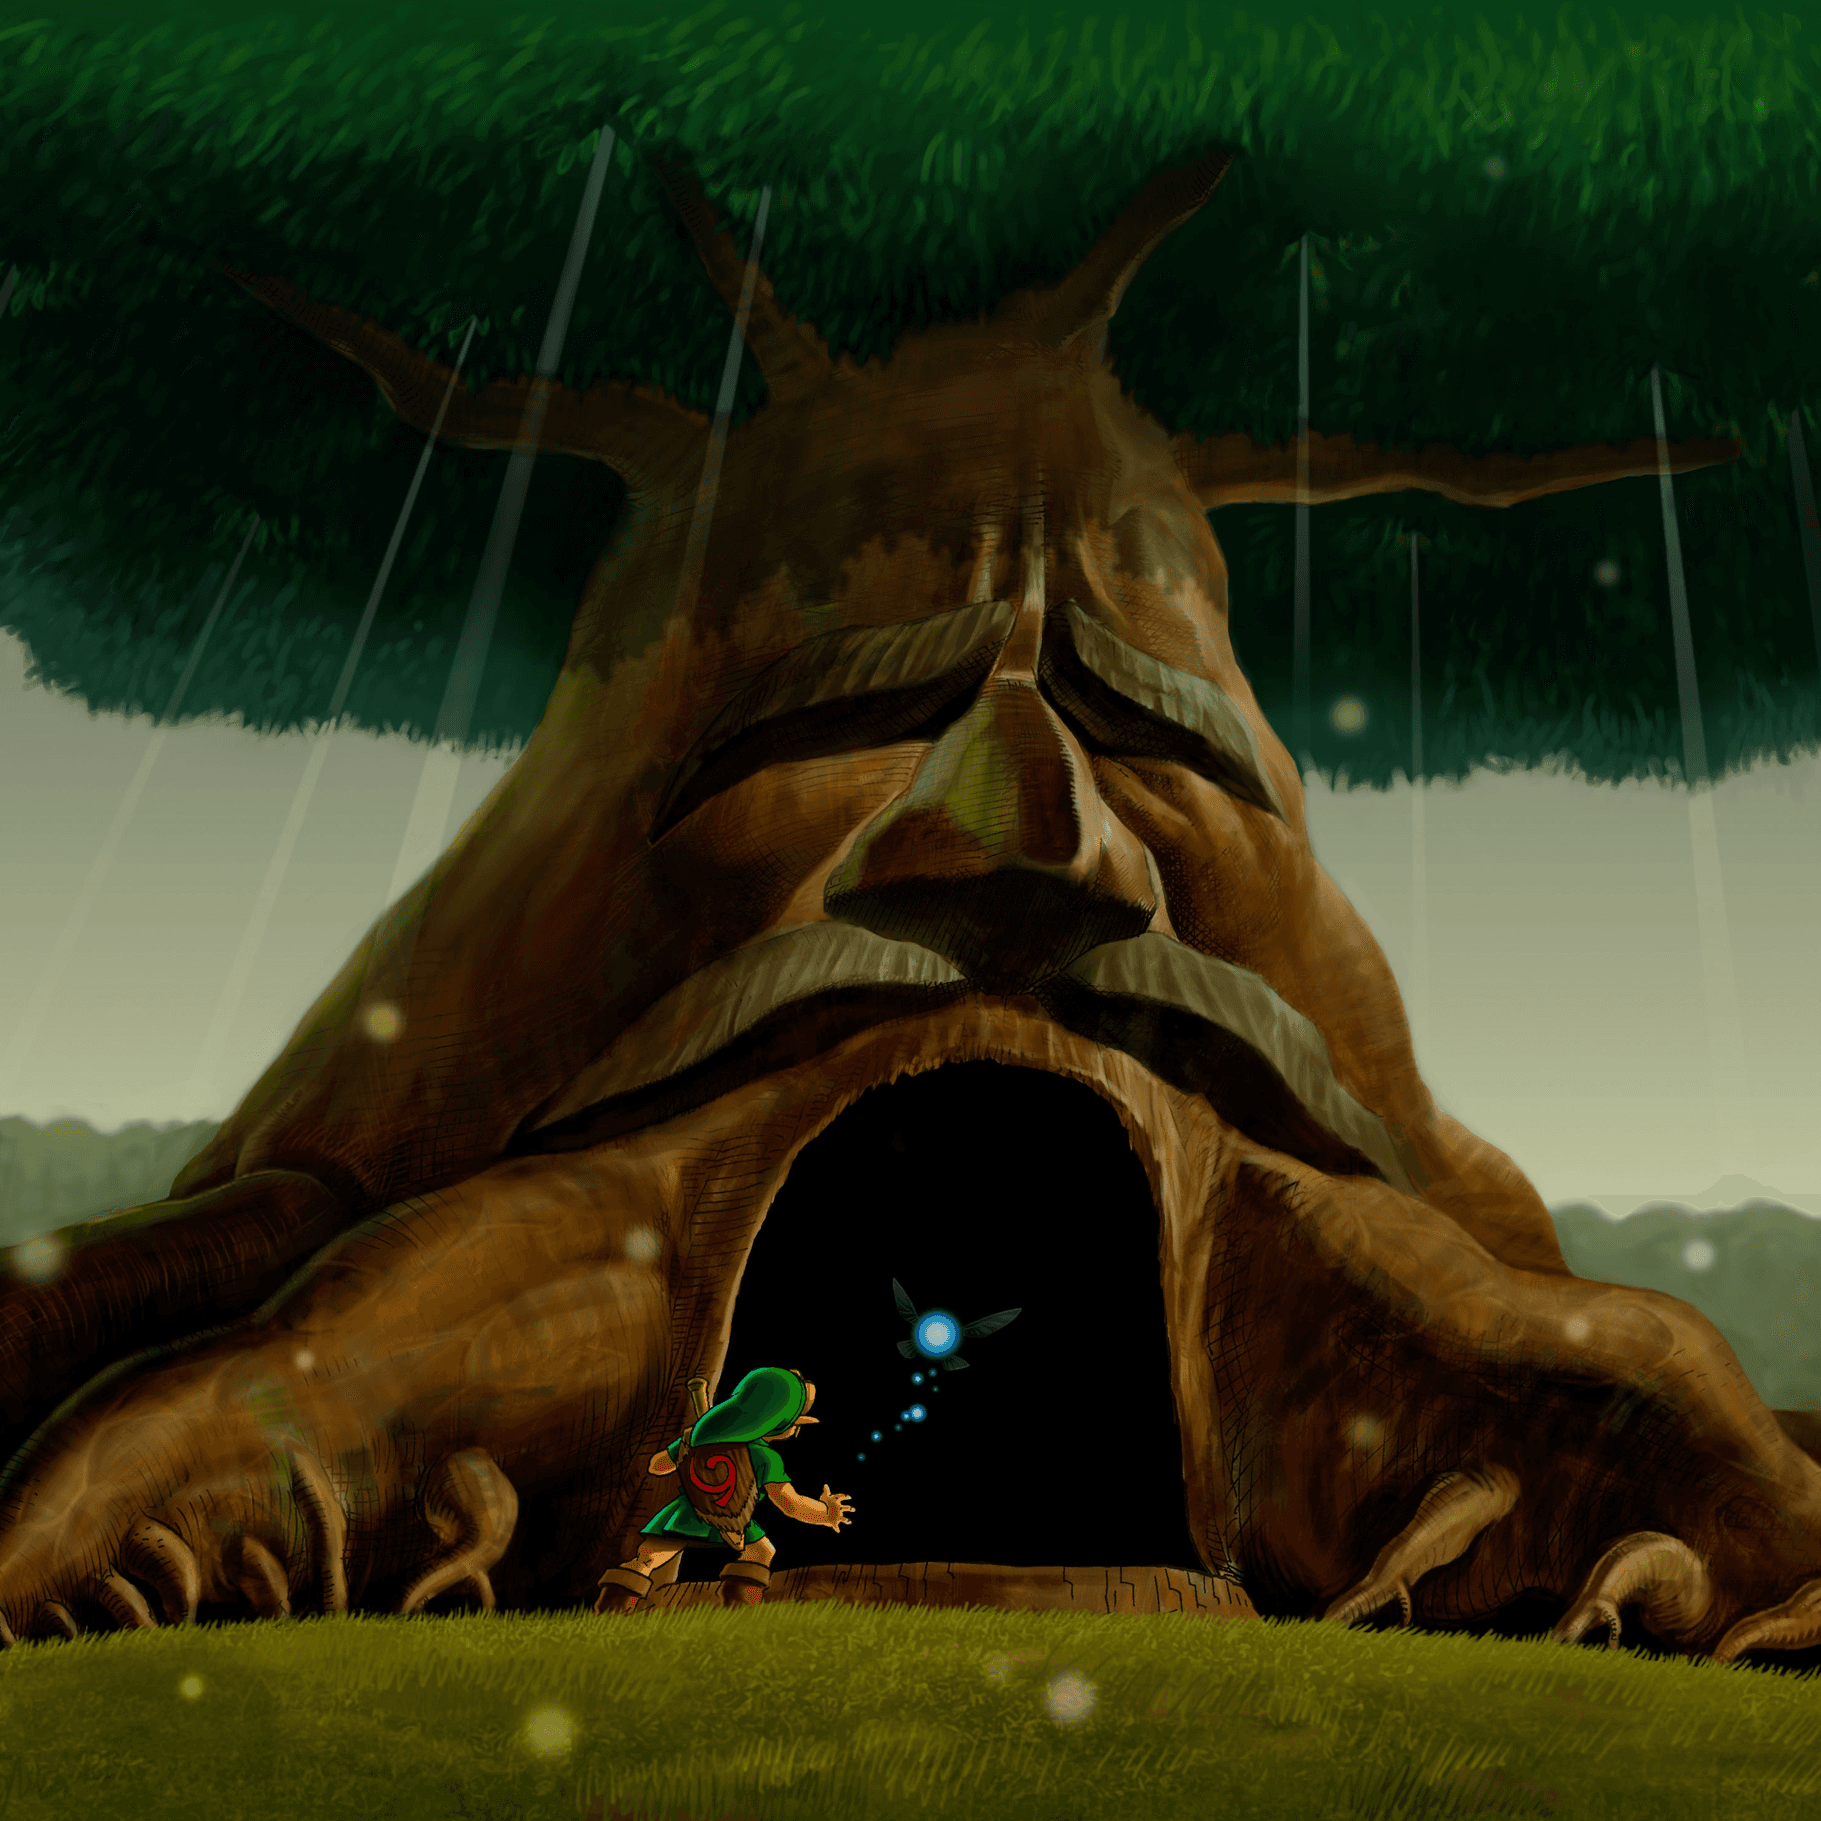 Zelda Theory: Ocarina of Time's Link Is The Series' Most Tragic Hero